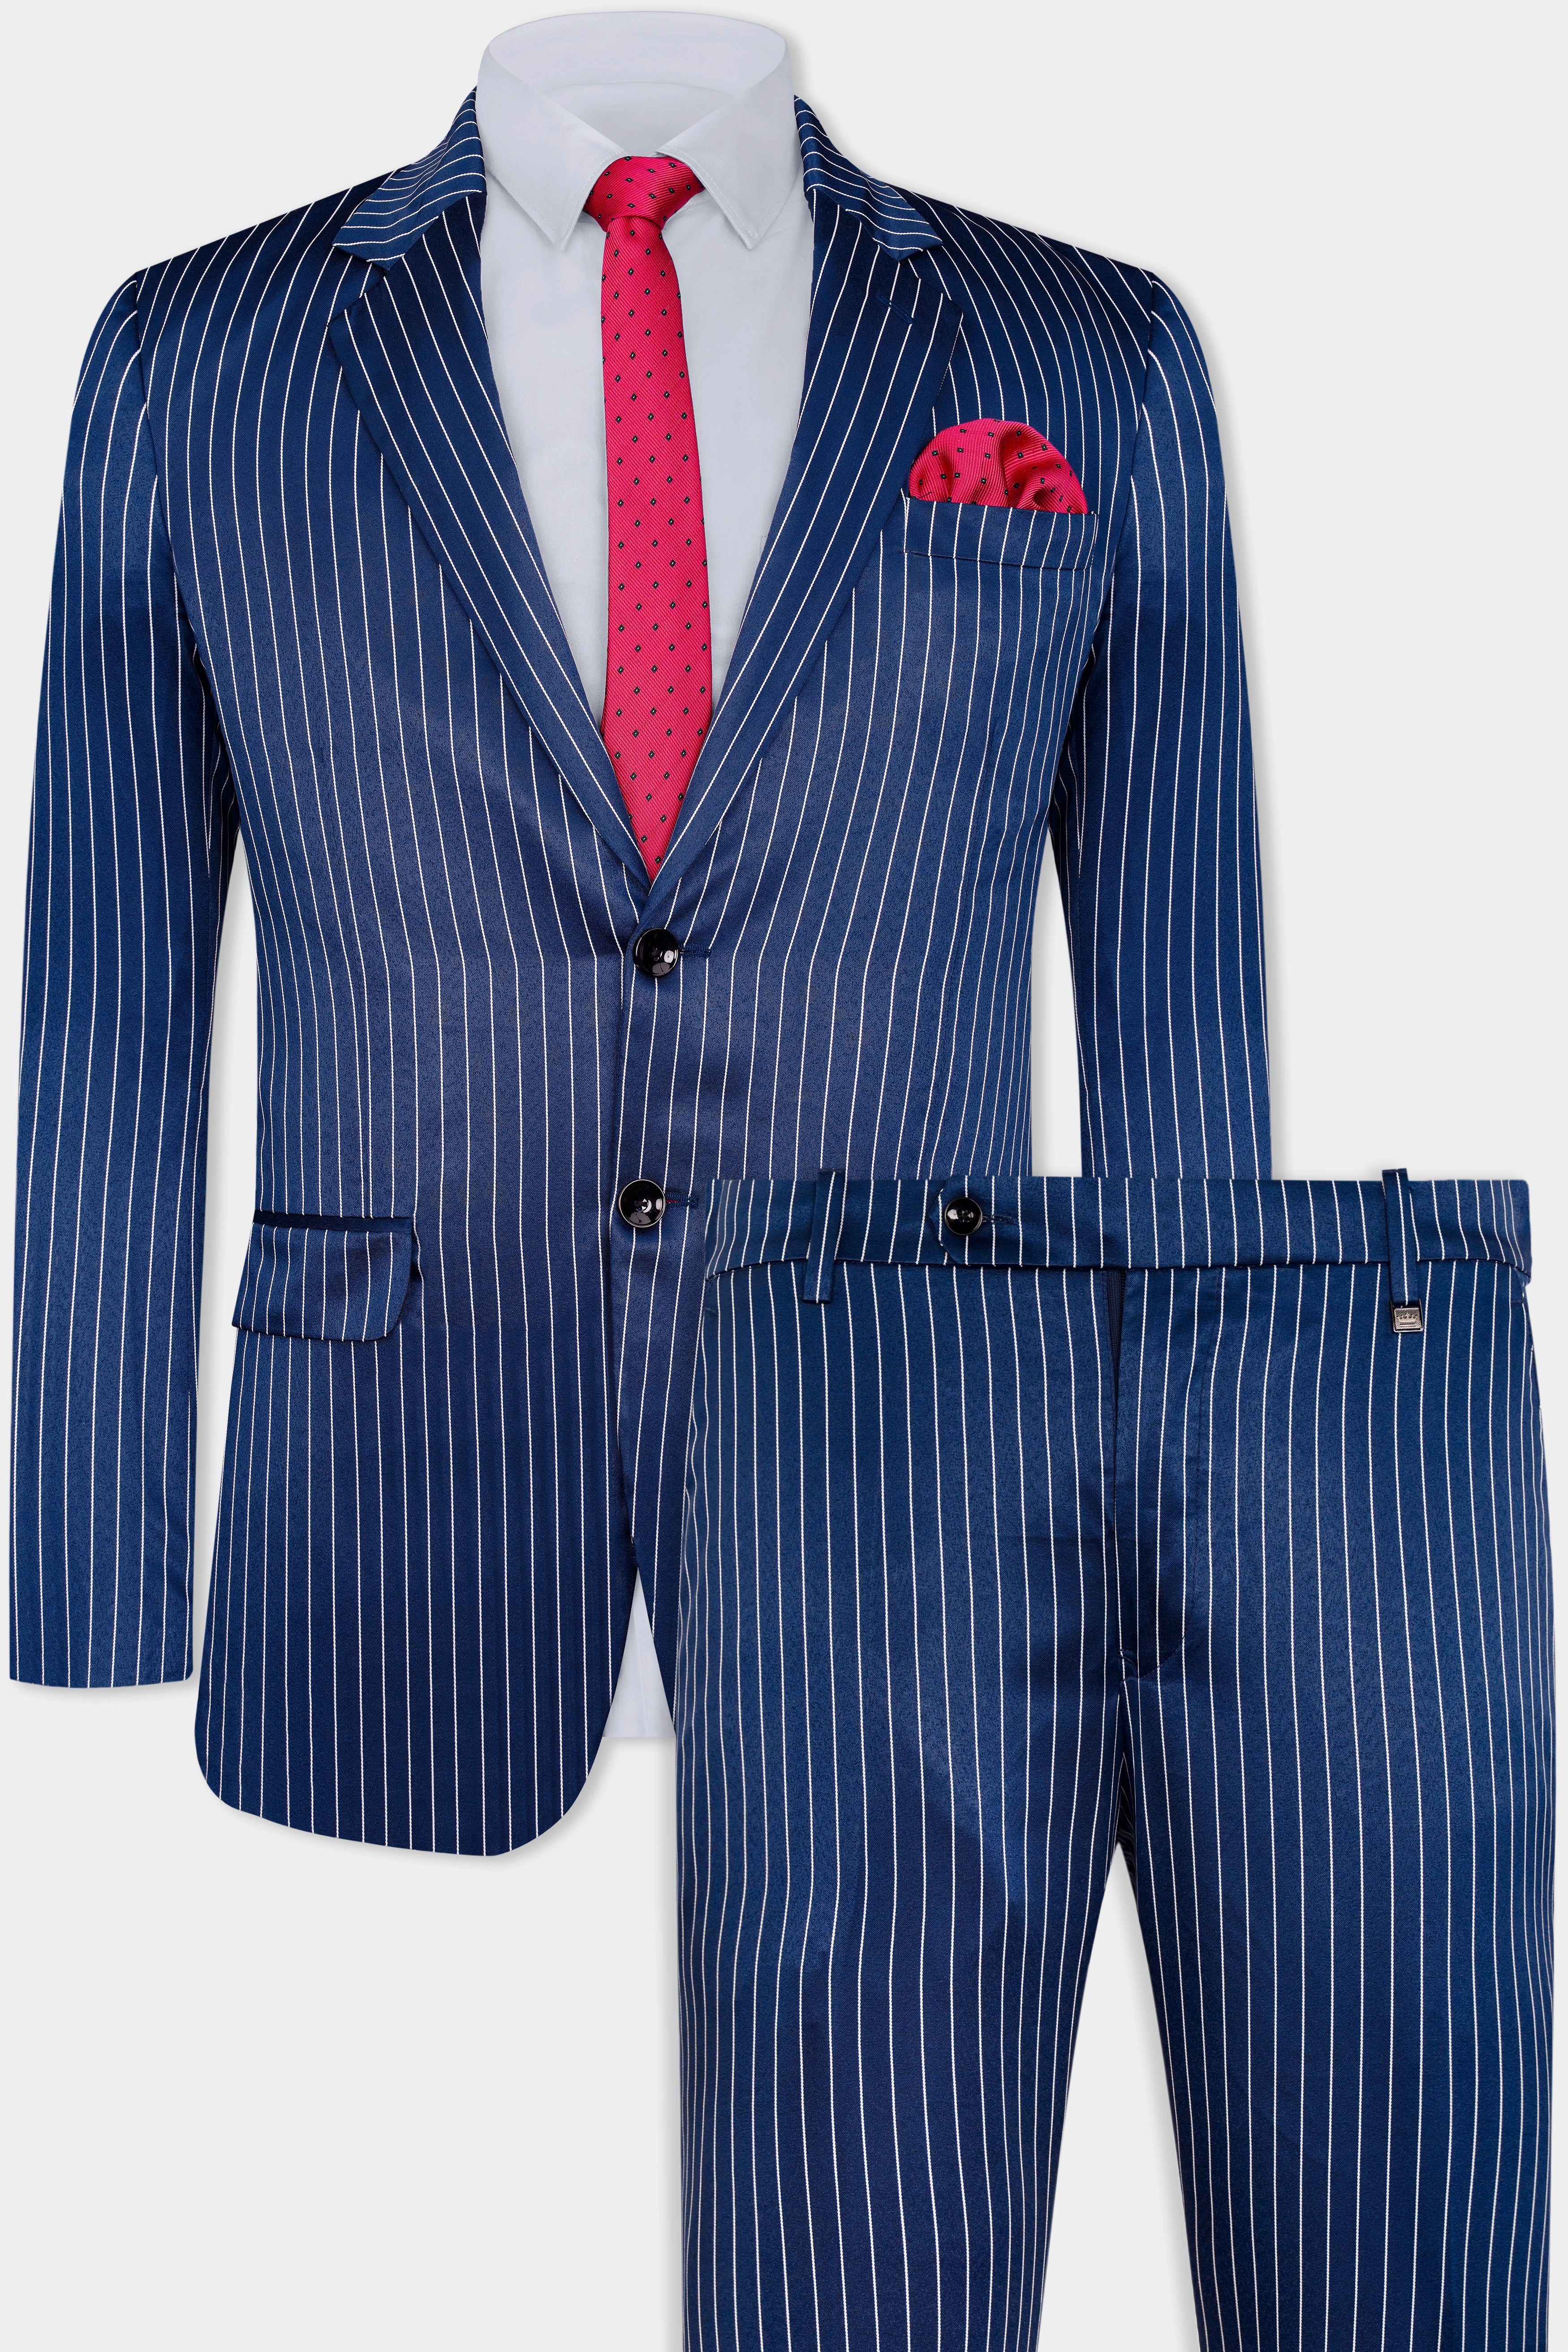 Cinder Blue and White Striped Wool Rich Suit